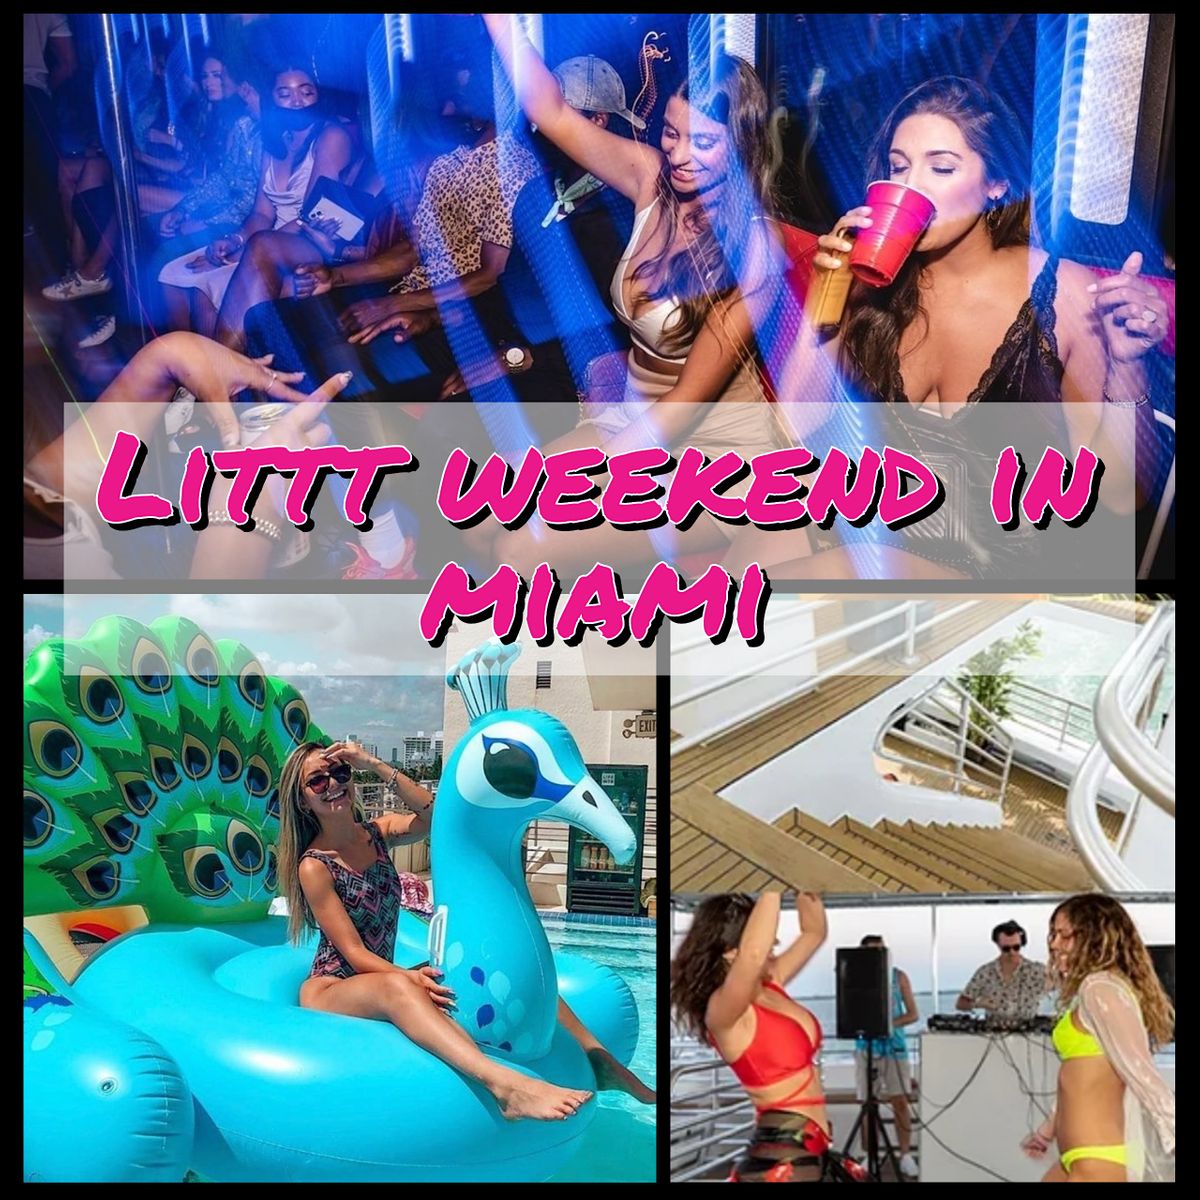 LITTT Weekend In Miami Yacht Party, Pool Party & Nightclub With Party Bus